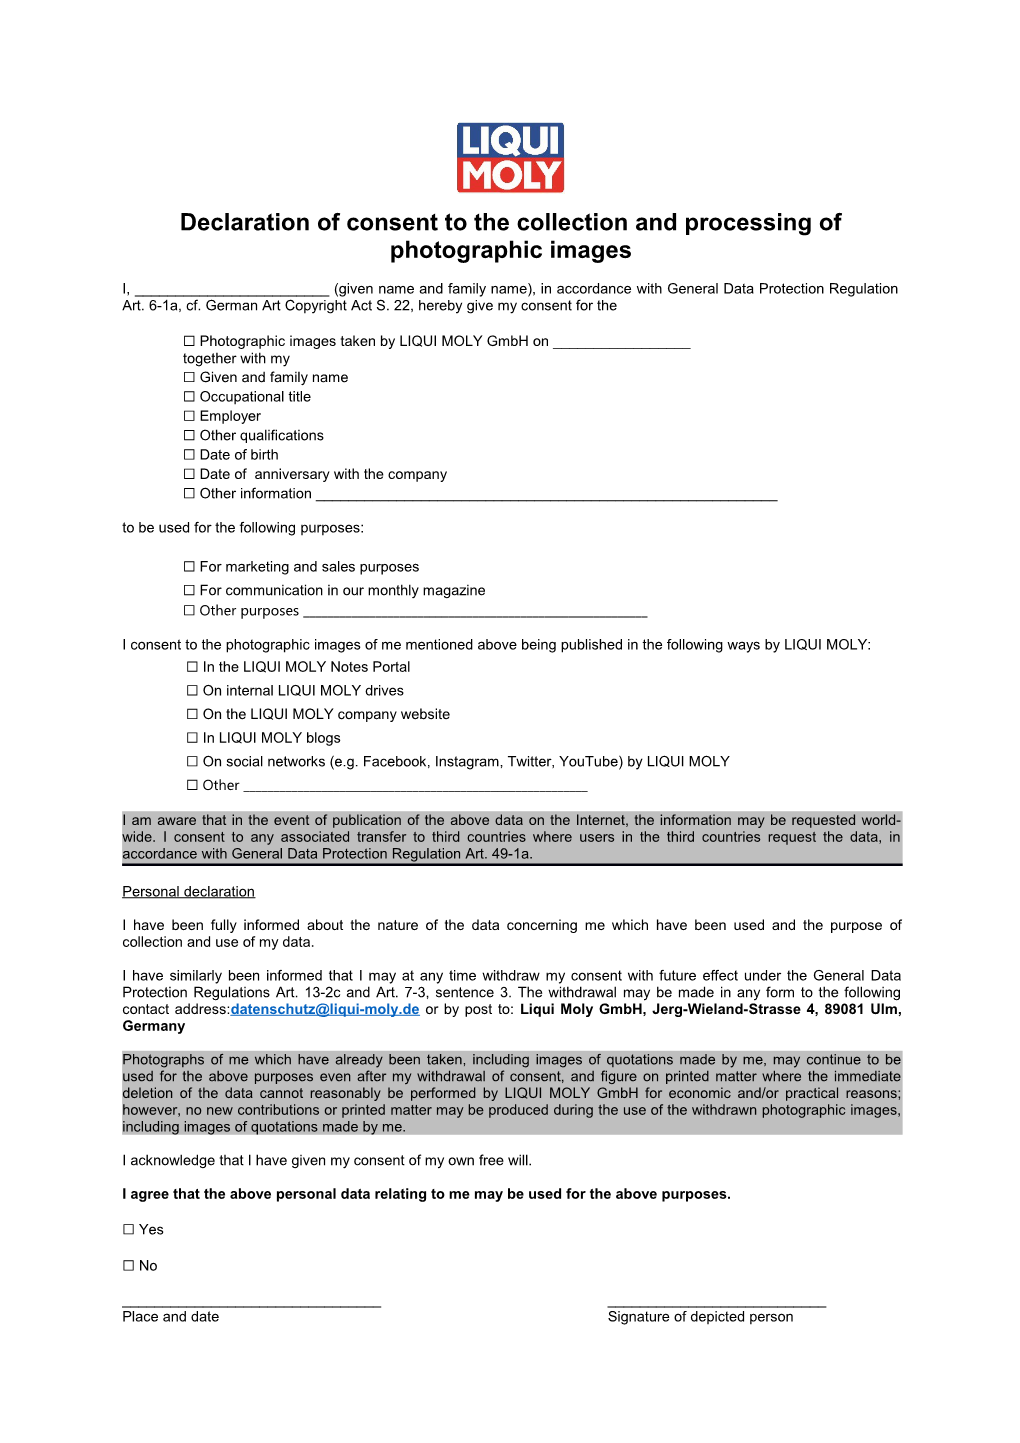 Declaration of Consent to the Collection and Processing of Photographic Images